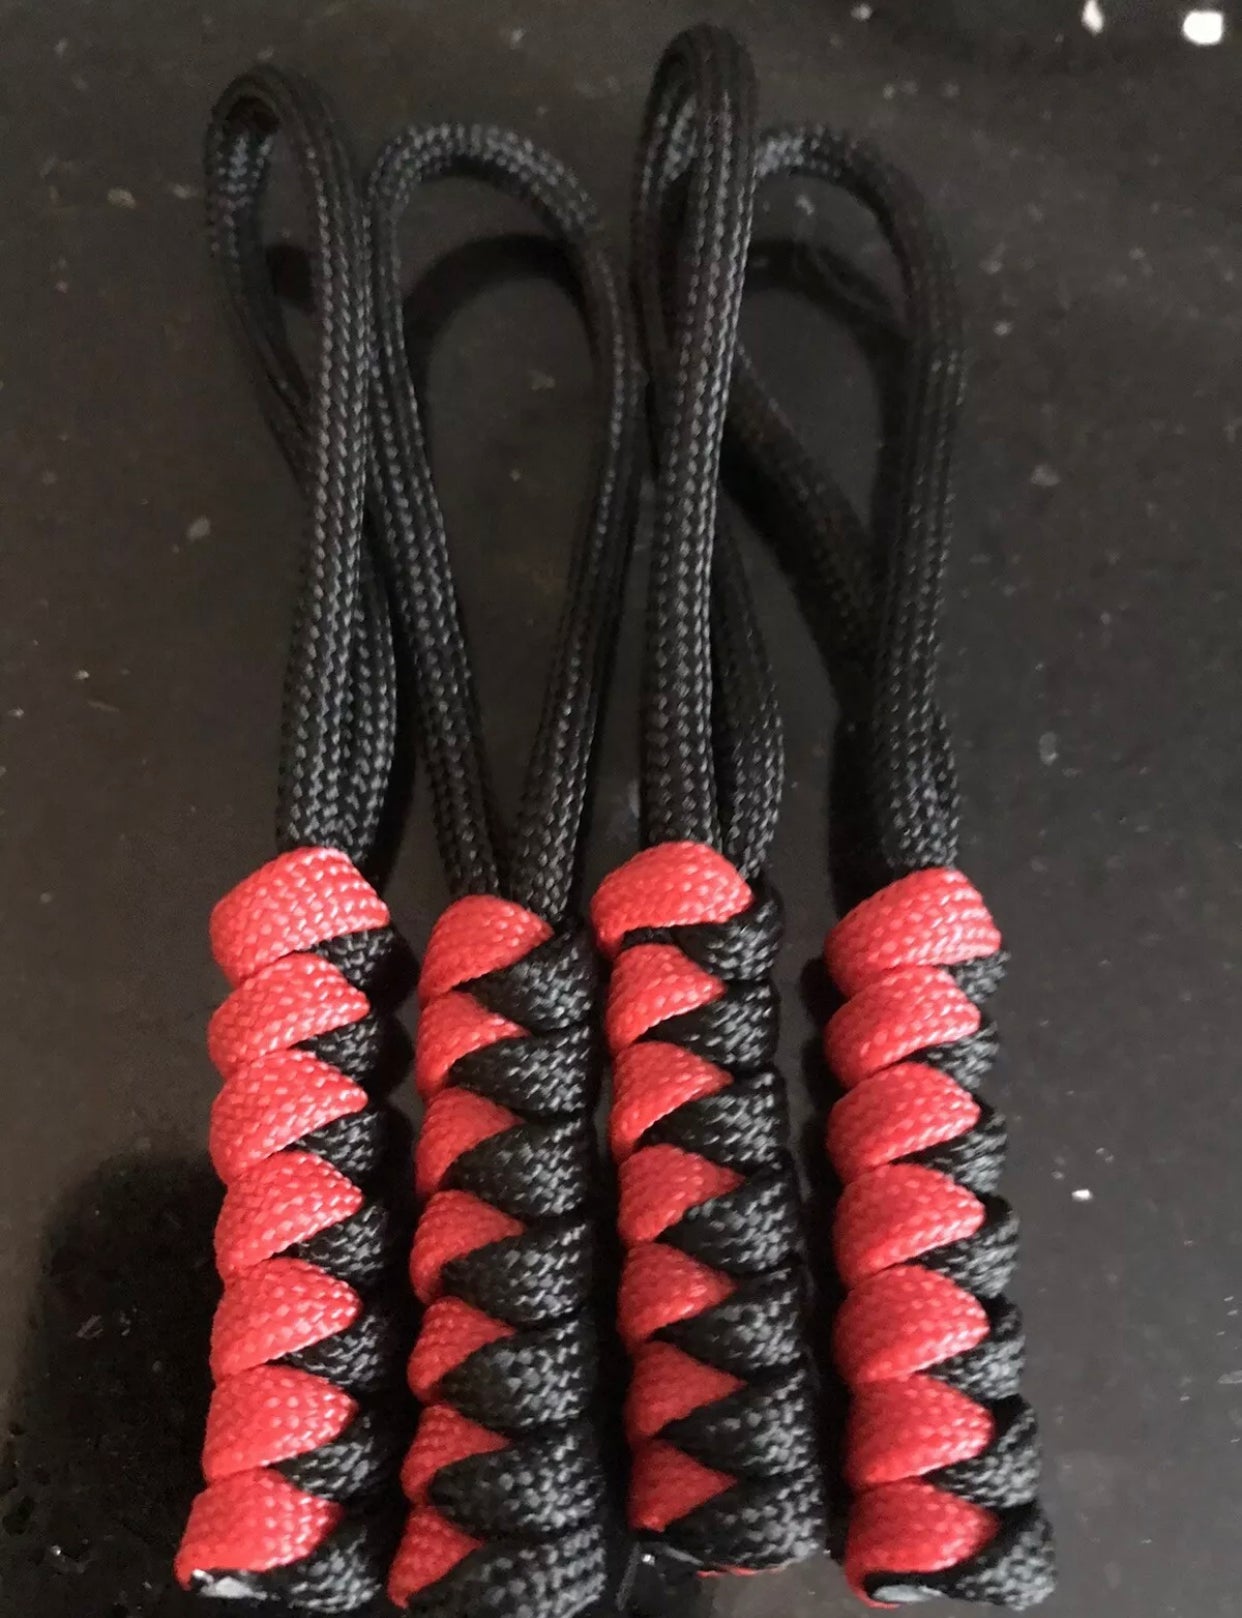 Paracord zip pulls in black and red (4 pack) light weight and strong, handmade in U.K